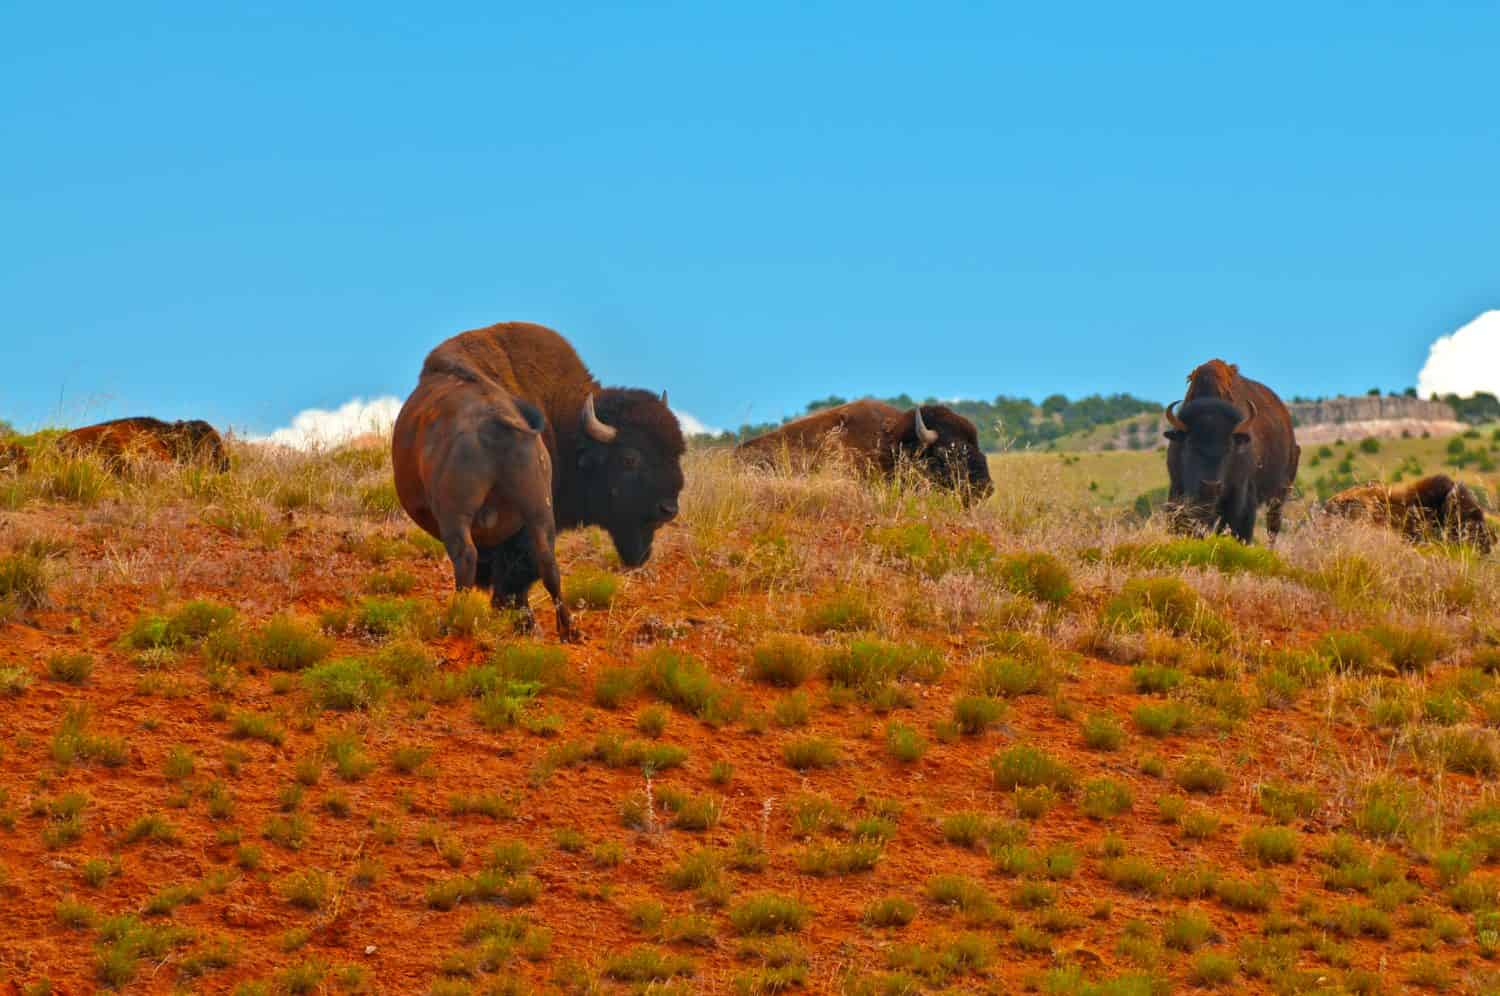 Buffalo roaming on the red dirt prairie in Thermopolis Wyoming